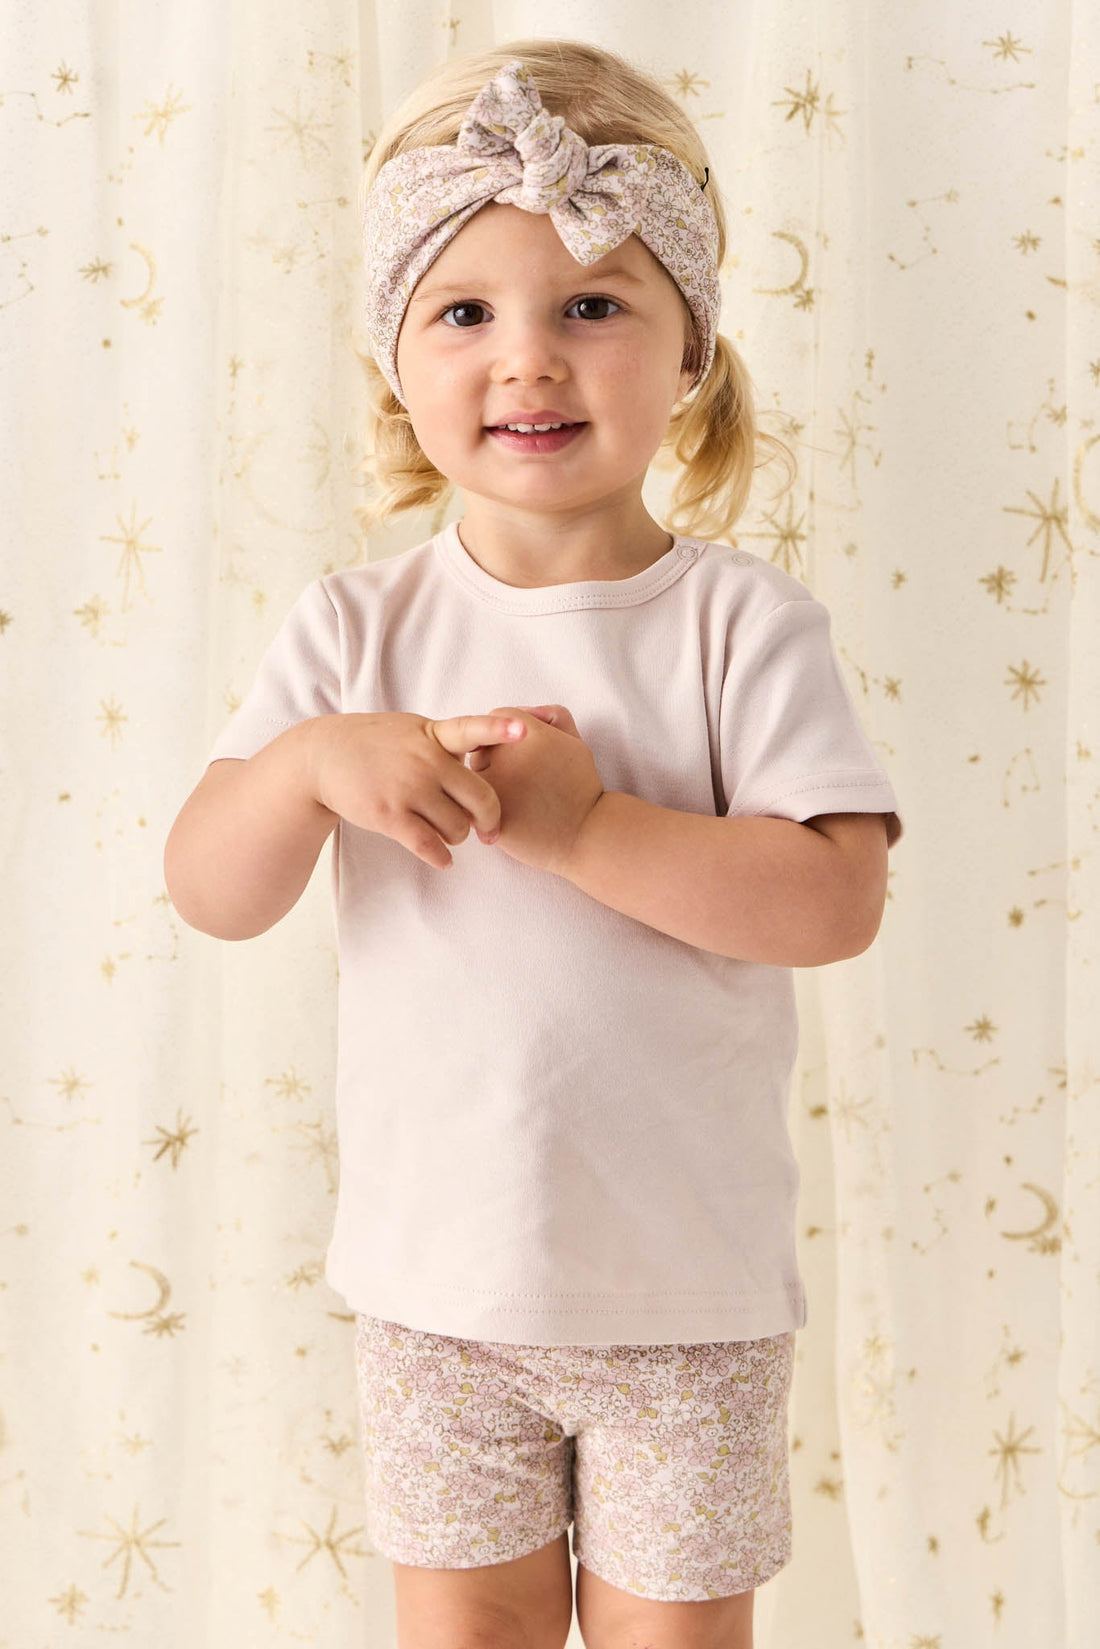 Pima Cotton Aude Oversized Tee - Rosewater Petite Goldie Childrens Top from Jamie Kay USA